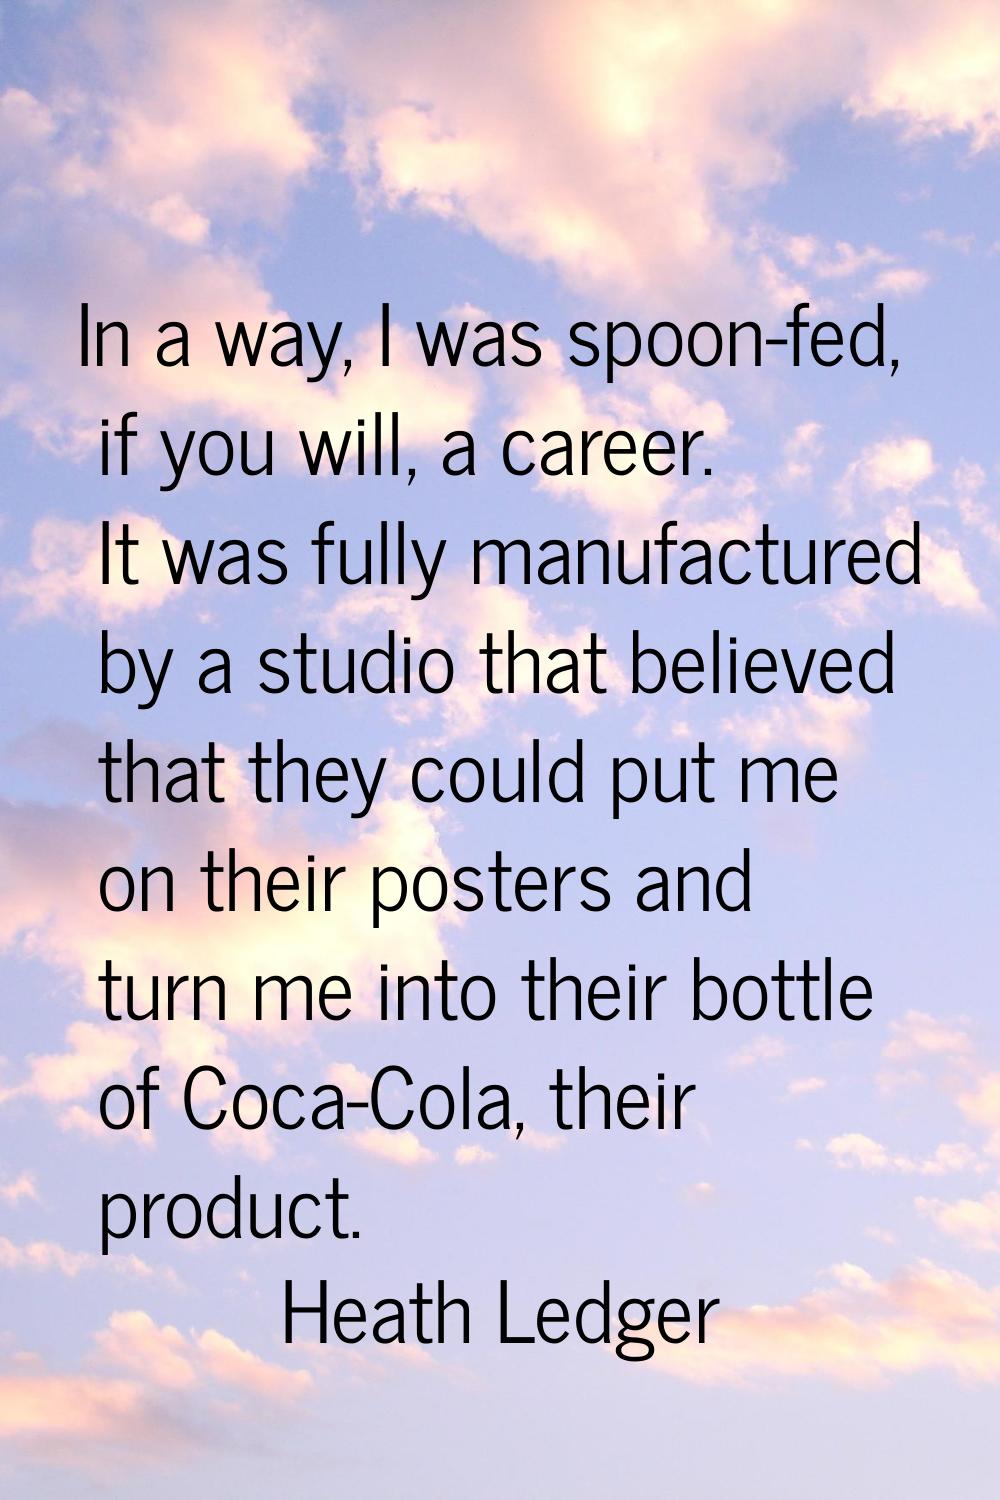 In a way, I was spoon-fed, if you will, a career. It was fully manufactured by a studio that believ